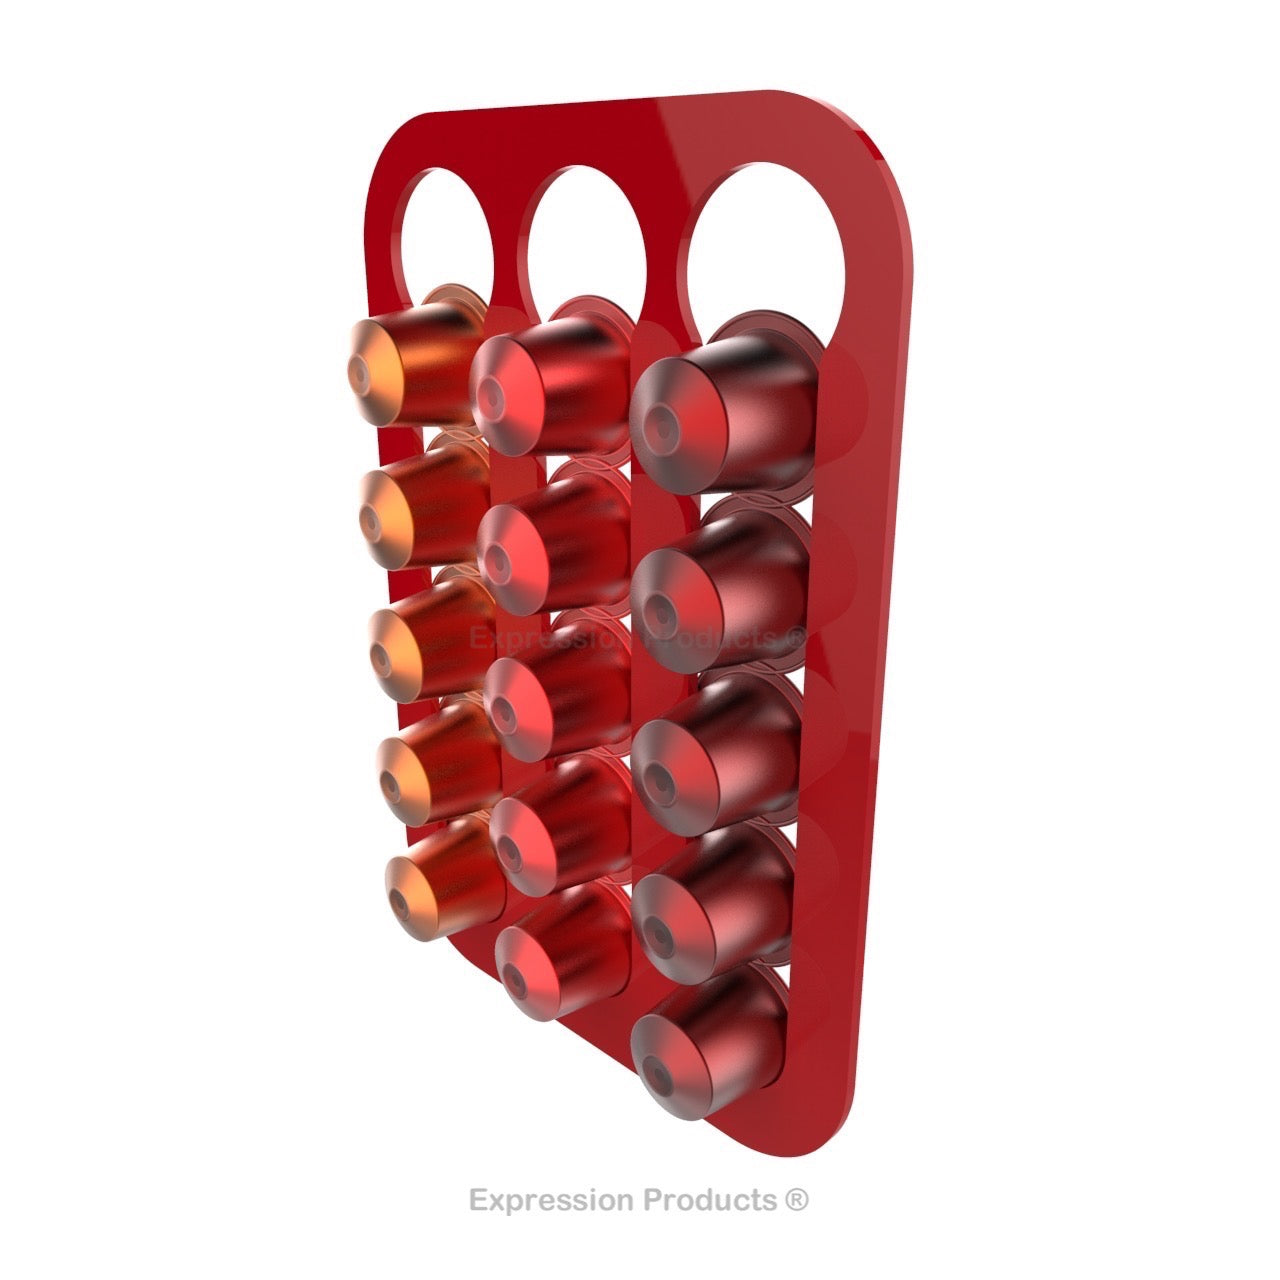 Magnetic Nespresso Original Line coffee pod holder shown in red holding 15 pods